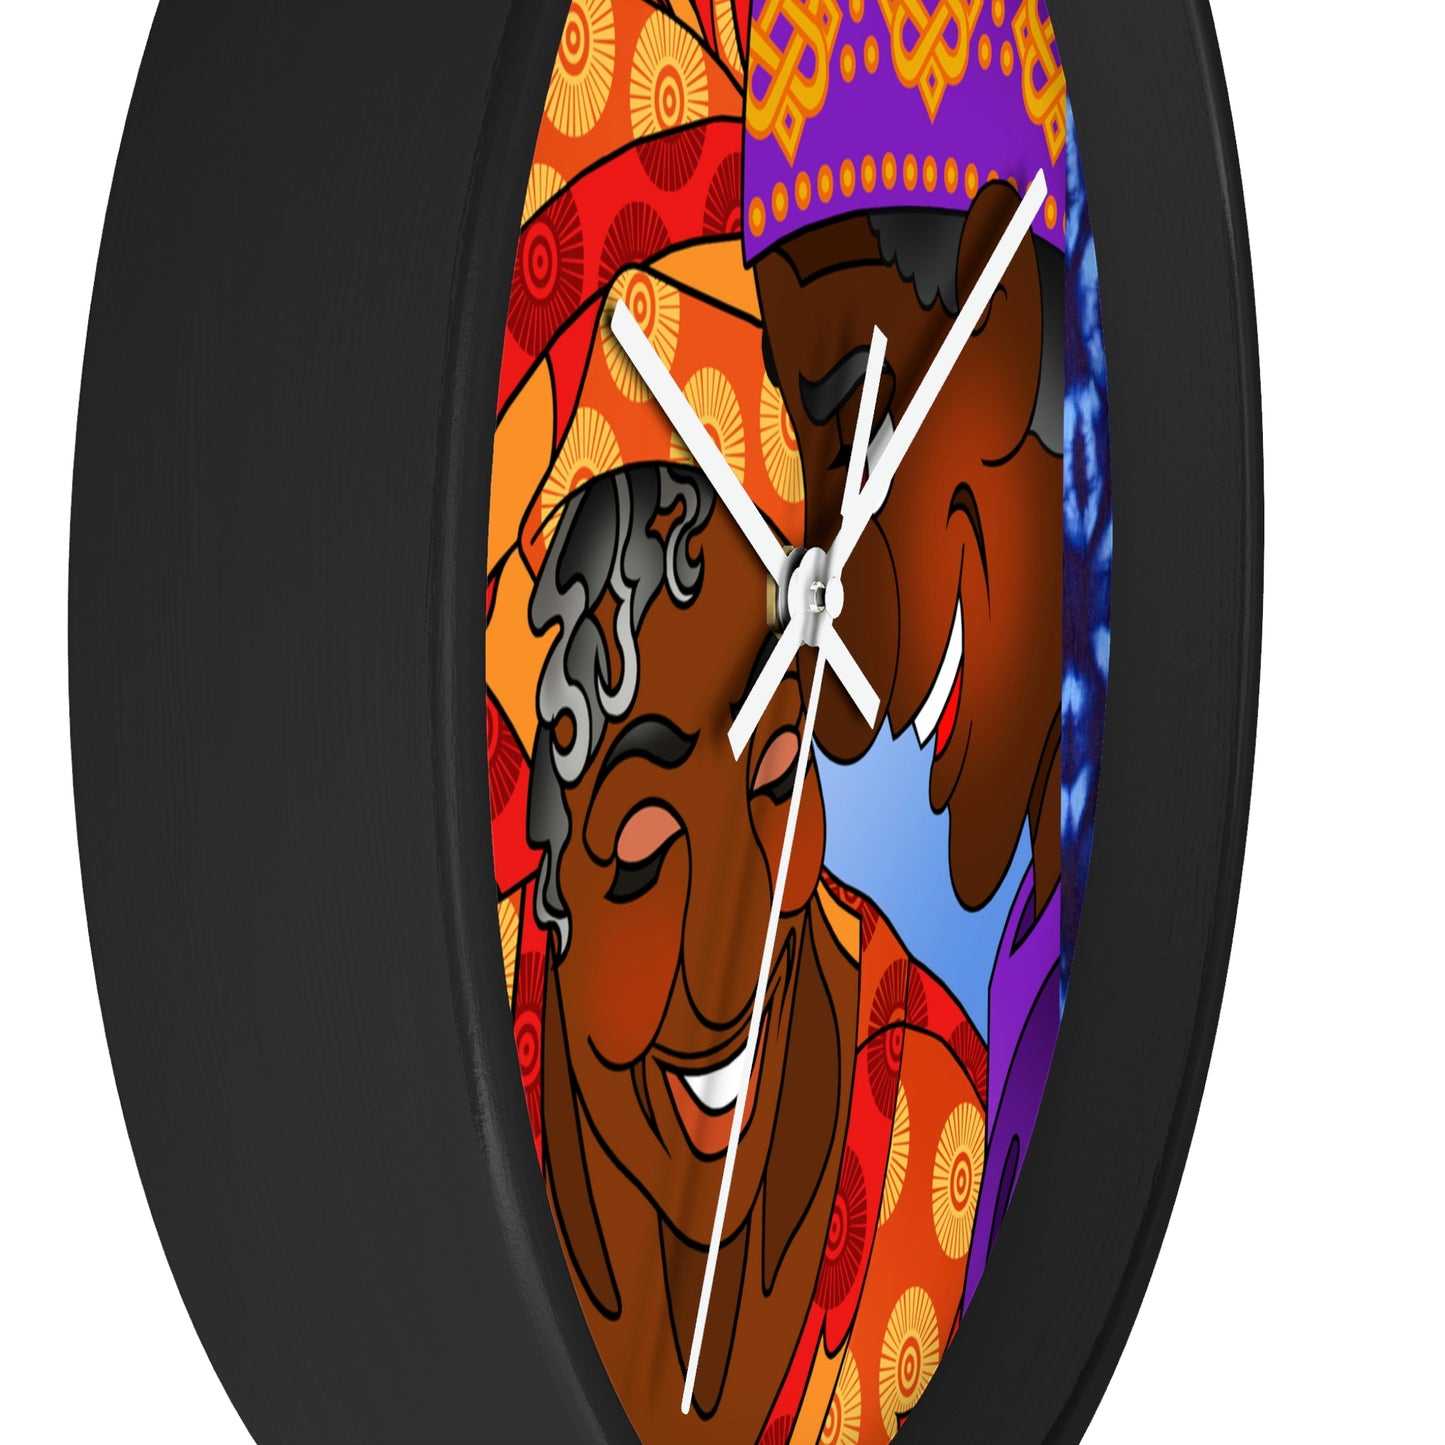 The Paramount Chief and One Wise Woman Wall clock